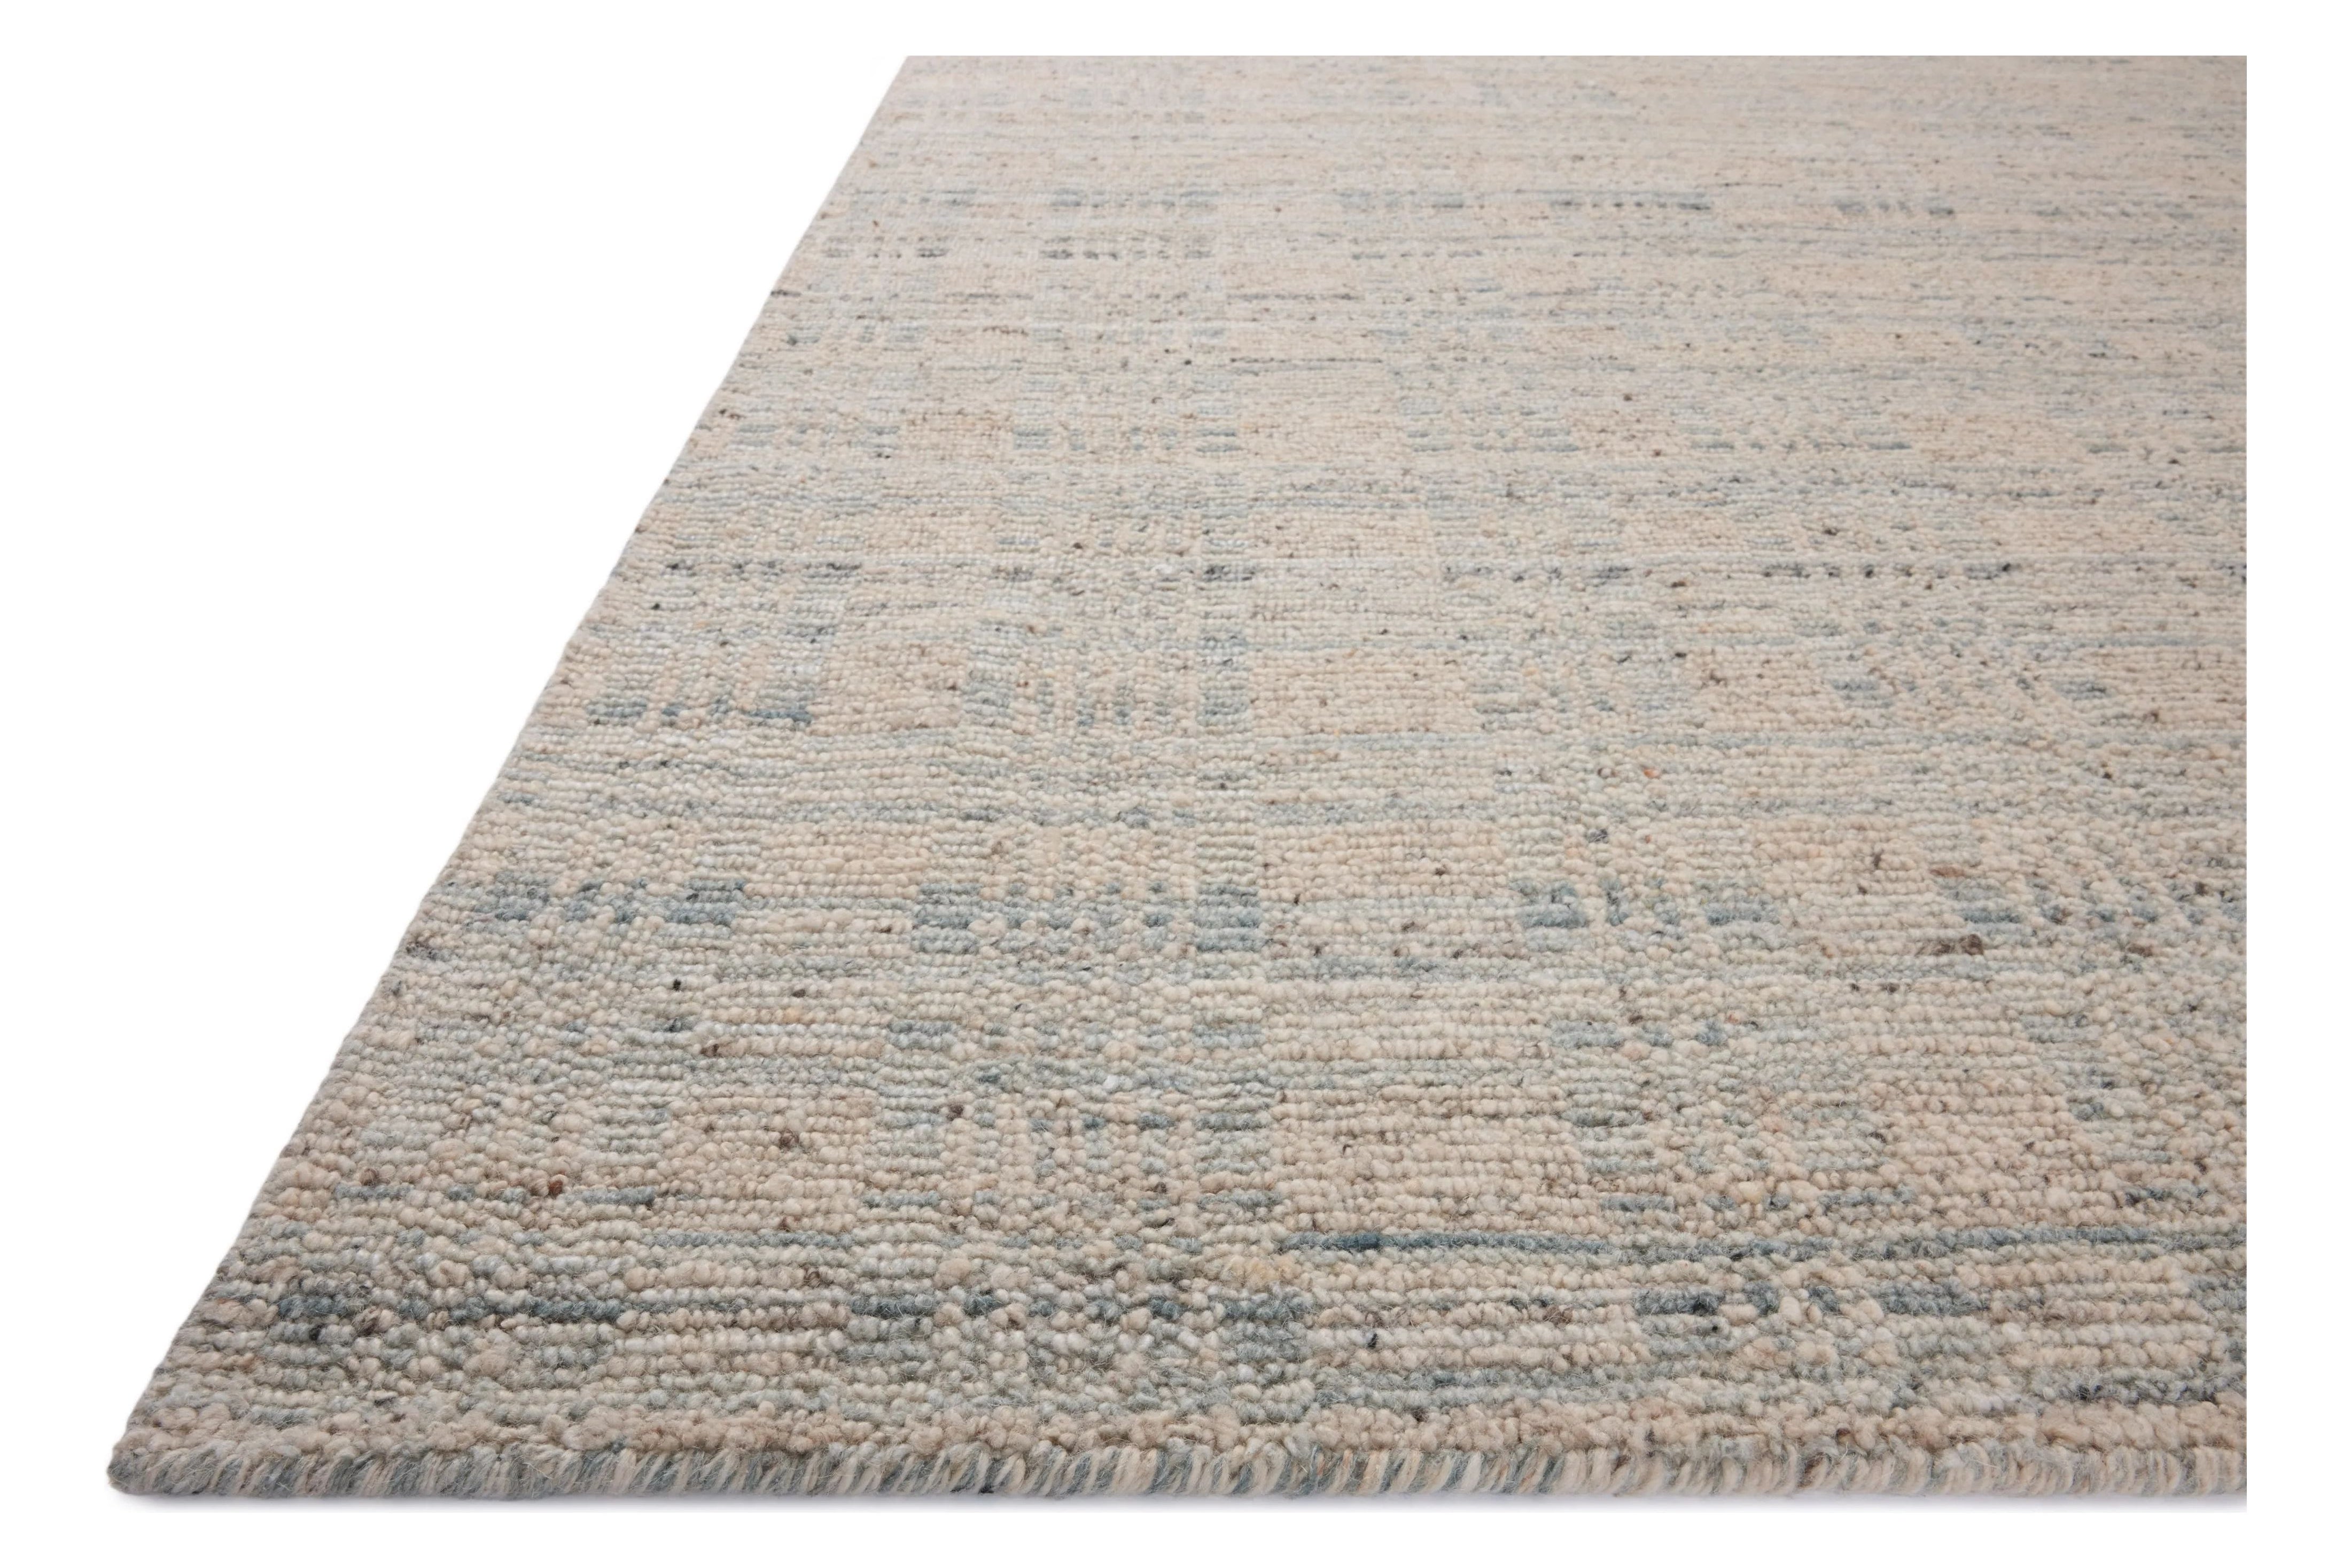 The Sonya Mist / Oatmeal Rug is a hand-loomed area rug with a light, airy palette and understated graphic design. The rug’s textural pile is a soft blend of wool and nylon that creates dimension in living rooms, bedrooms, and more. Amethyst Home provides interior design, new home construction design consulting, vintage area rugs, and lighting in the Laguna Beach metro area.